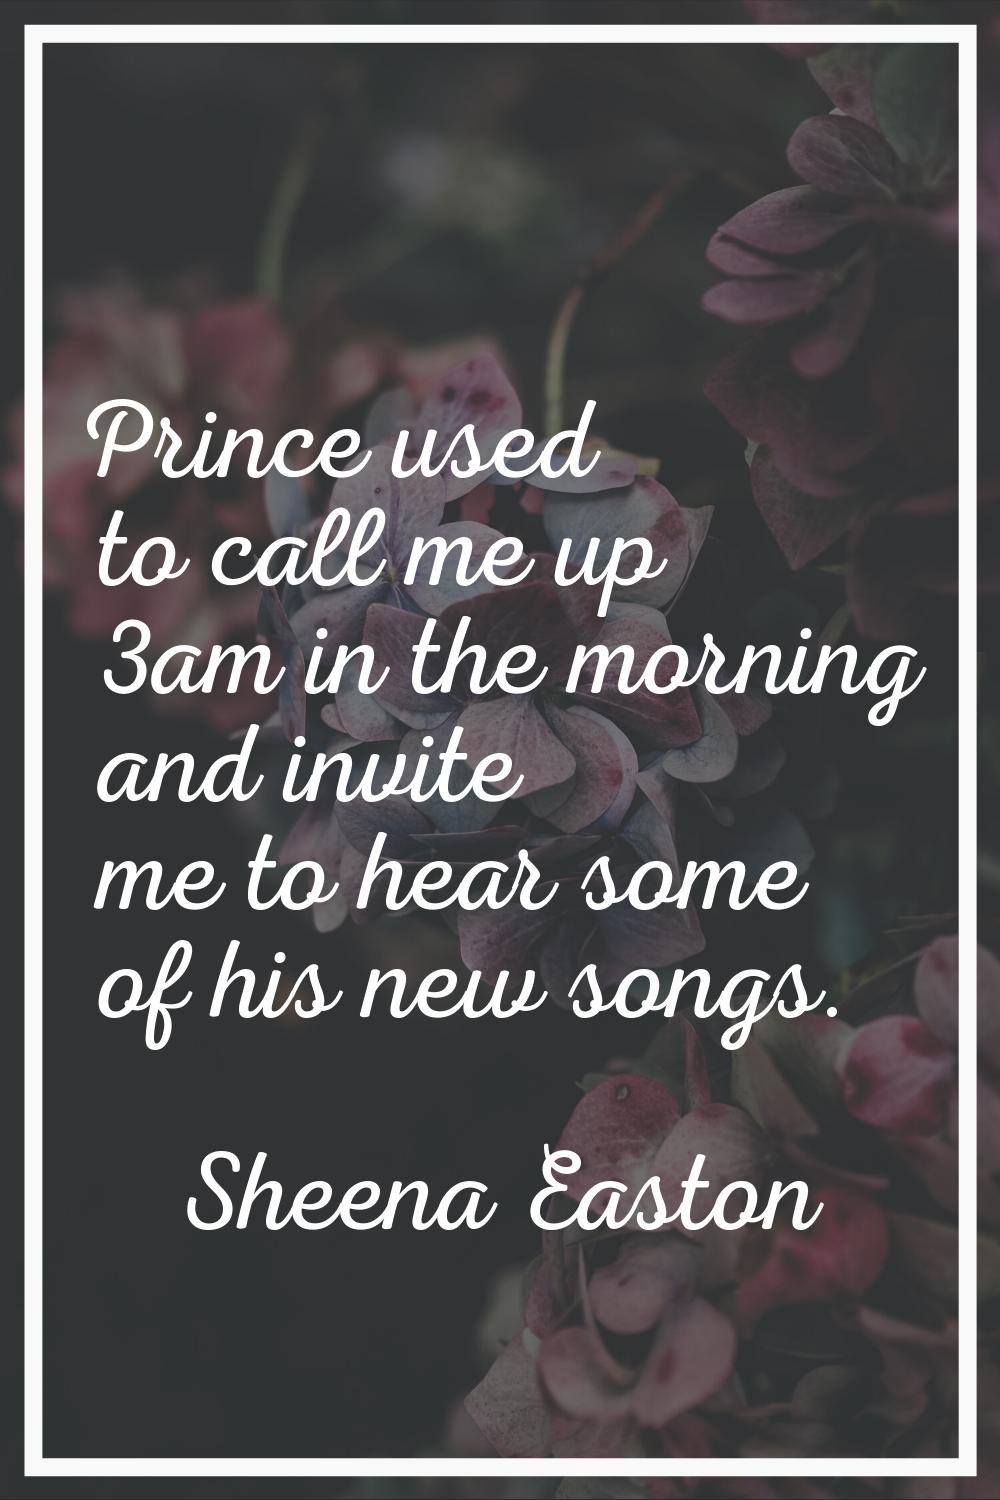 Prince used to call me up 3am in the morning and invite me to hear some of his new songs.